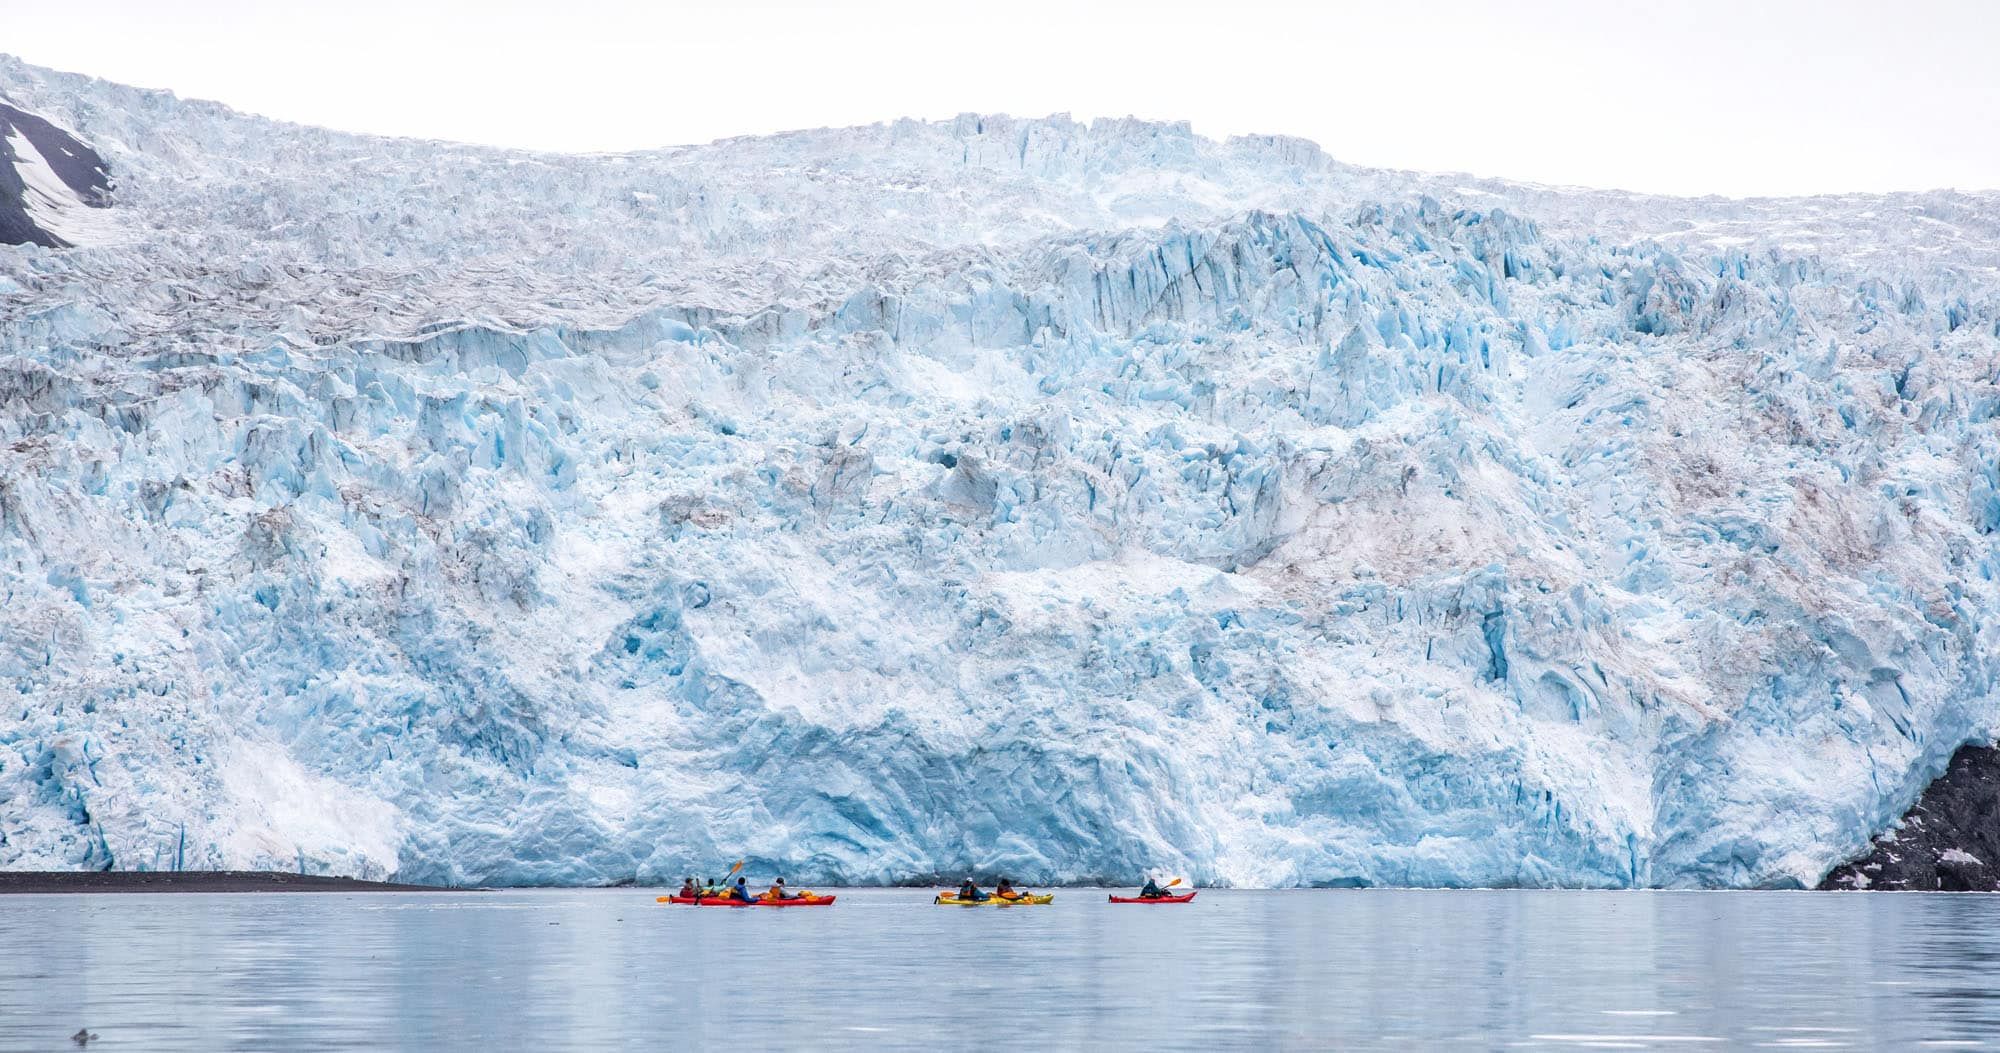 Featured image for “Aialik Glacier Kayaking: Beauty & Adventure in Kenai Fjords”